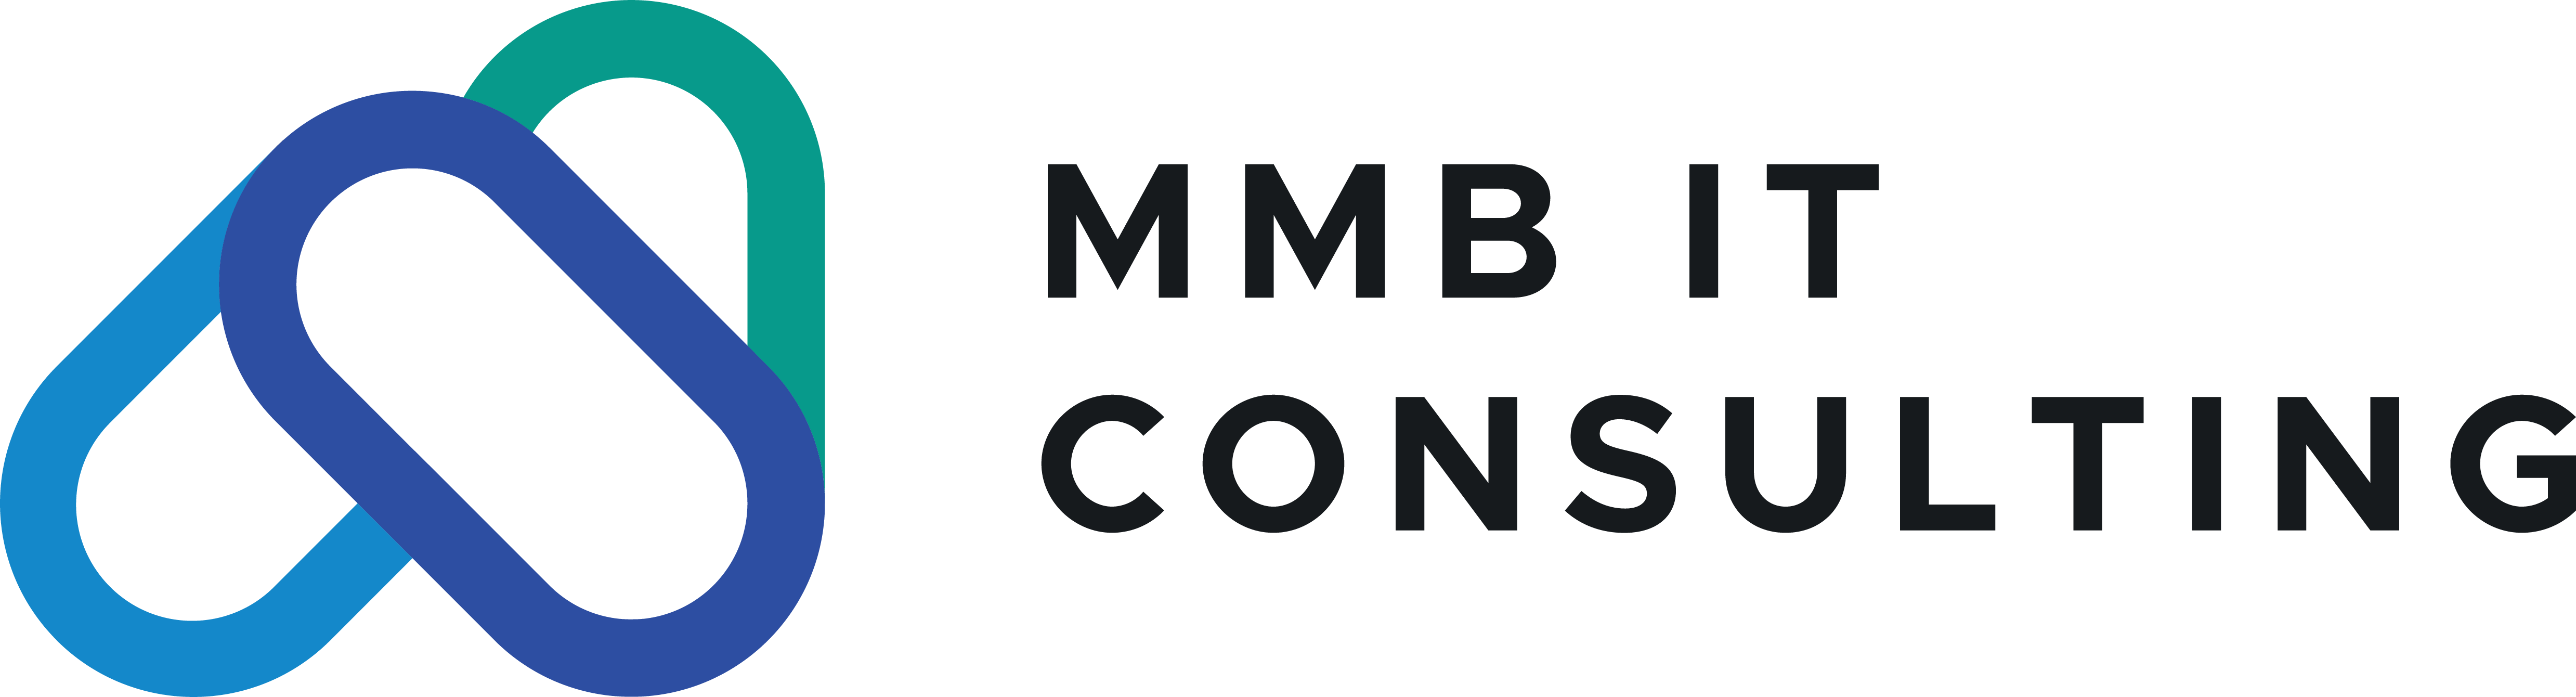 MMB IT Consulting